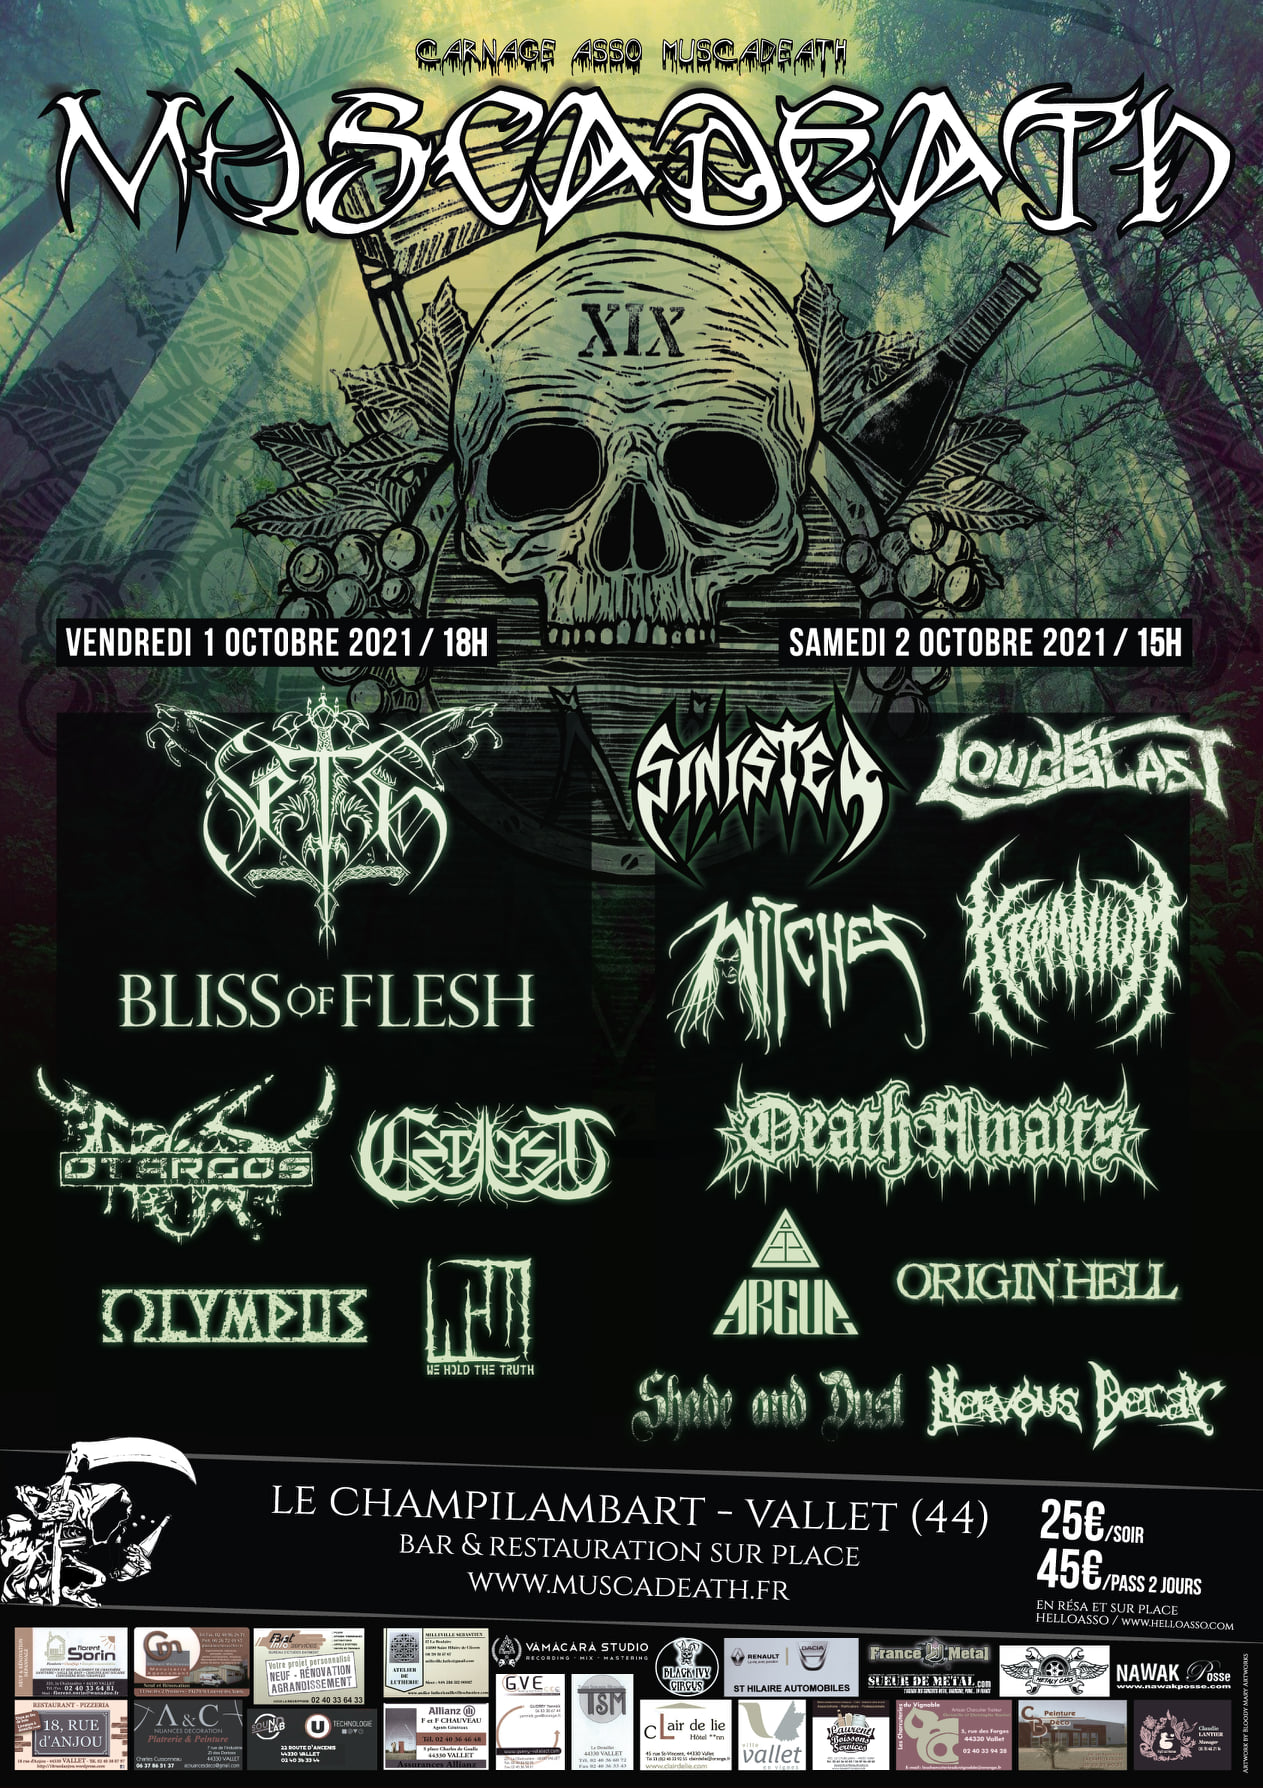 Witches flyer Sinister - Loudblast - WITCHES - Kraanium - Death Awaits - Argue - Origin'Hell - Shade and Dust - Nervous Decay @ Muscadeath XIX Le Champilambart Vallet (44)